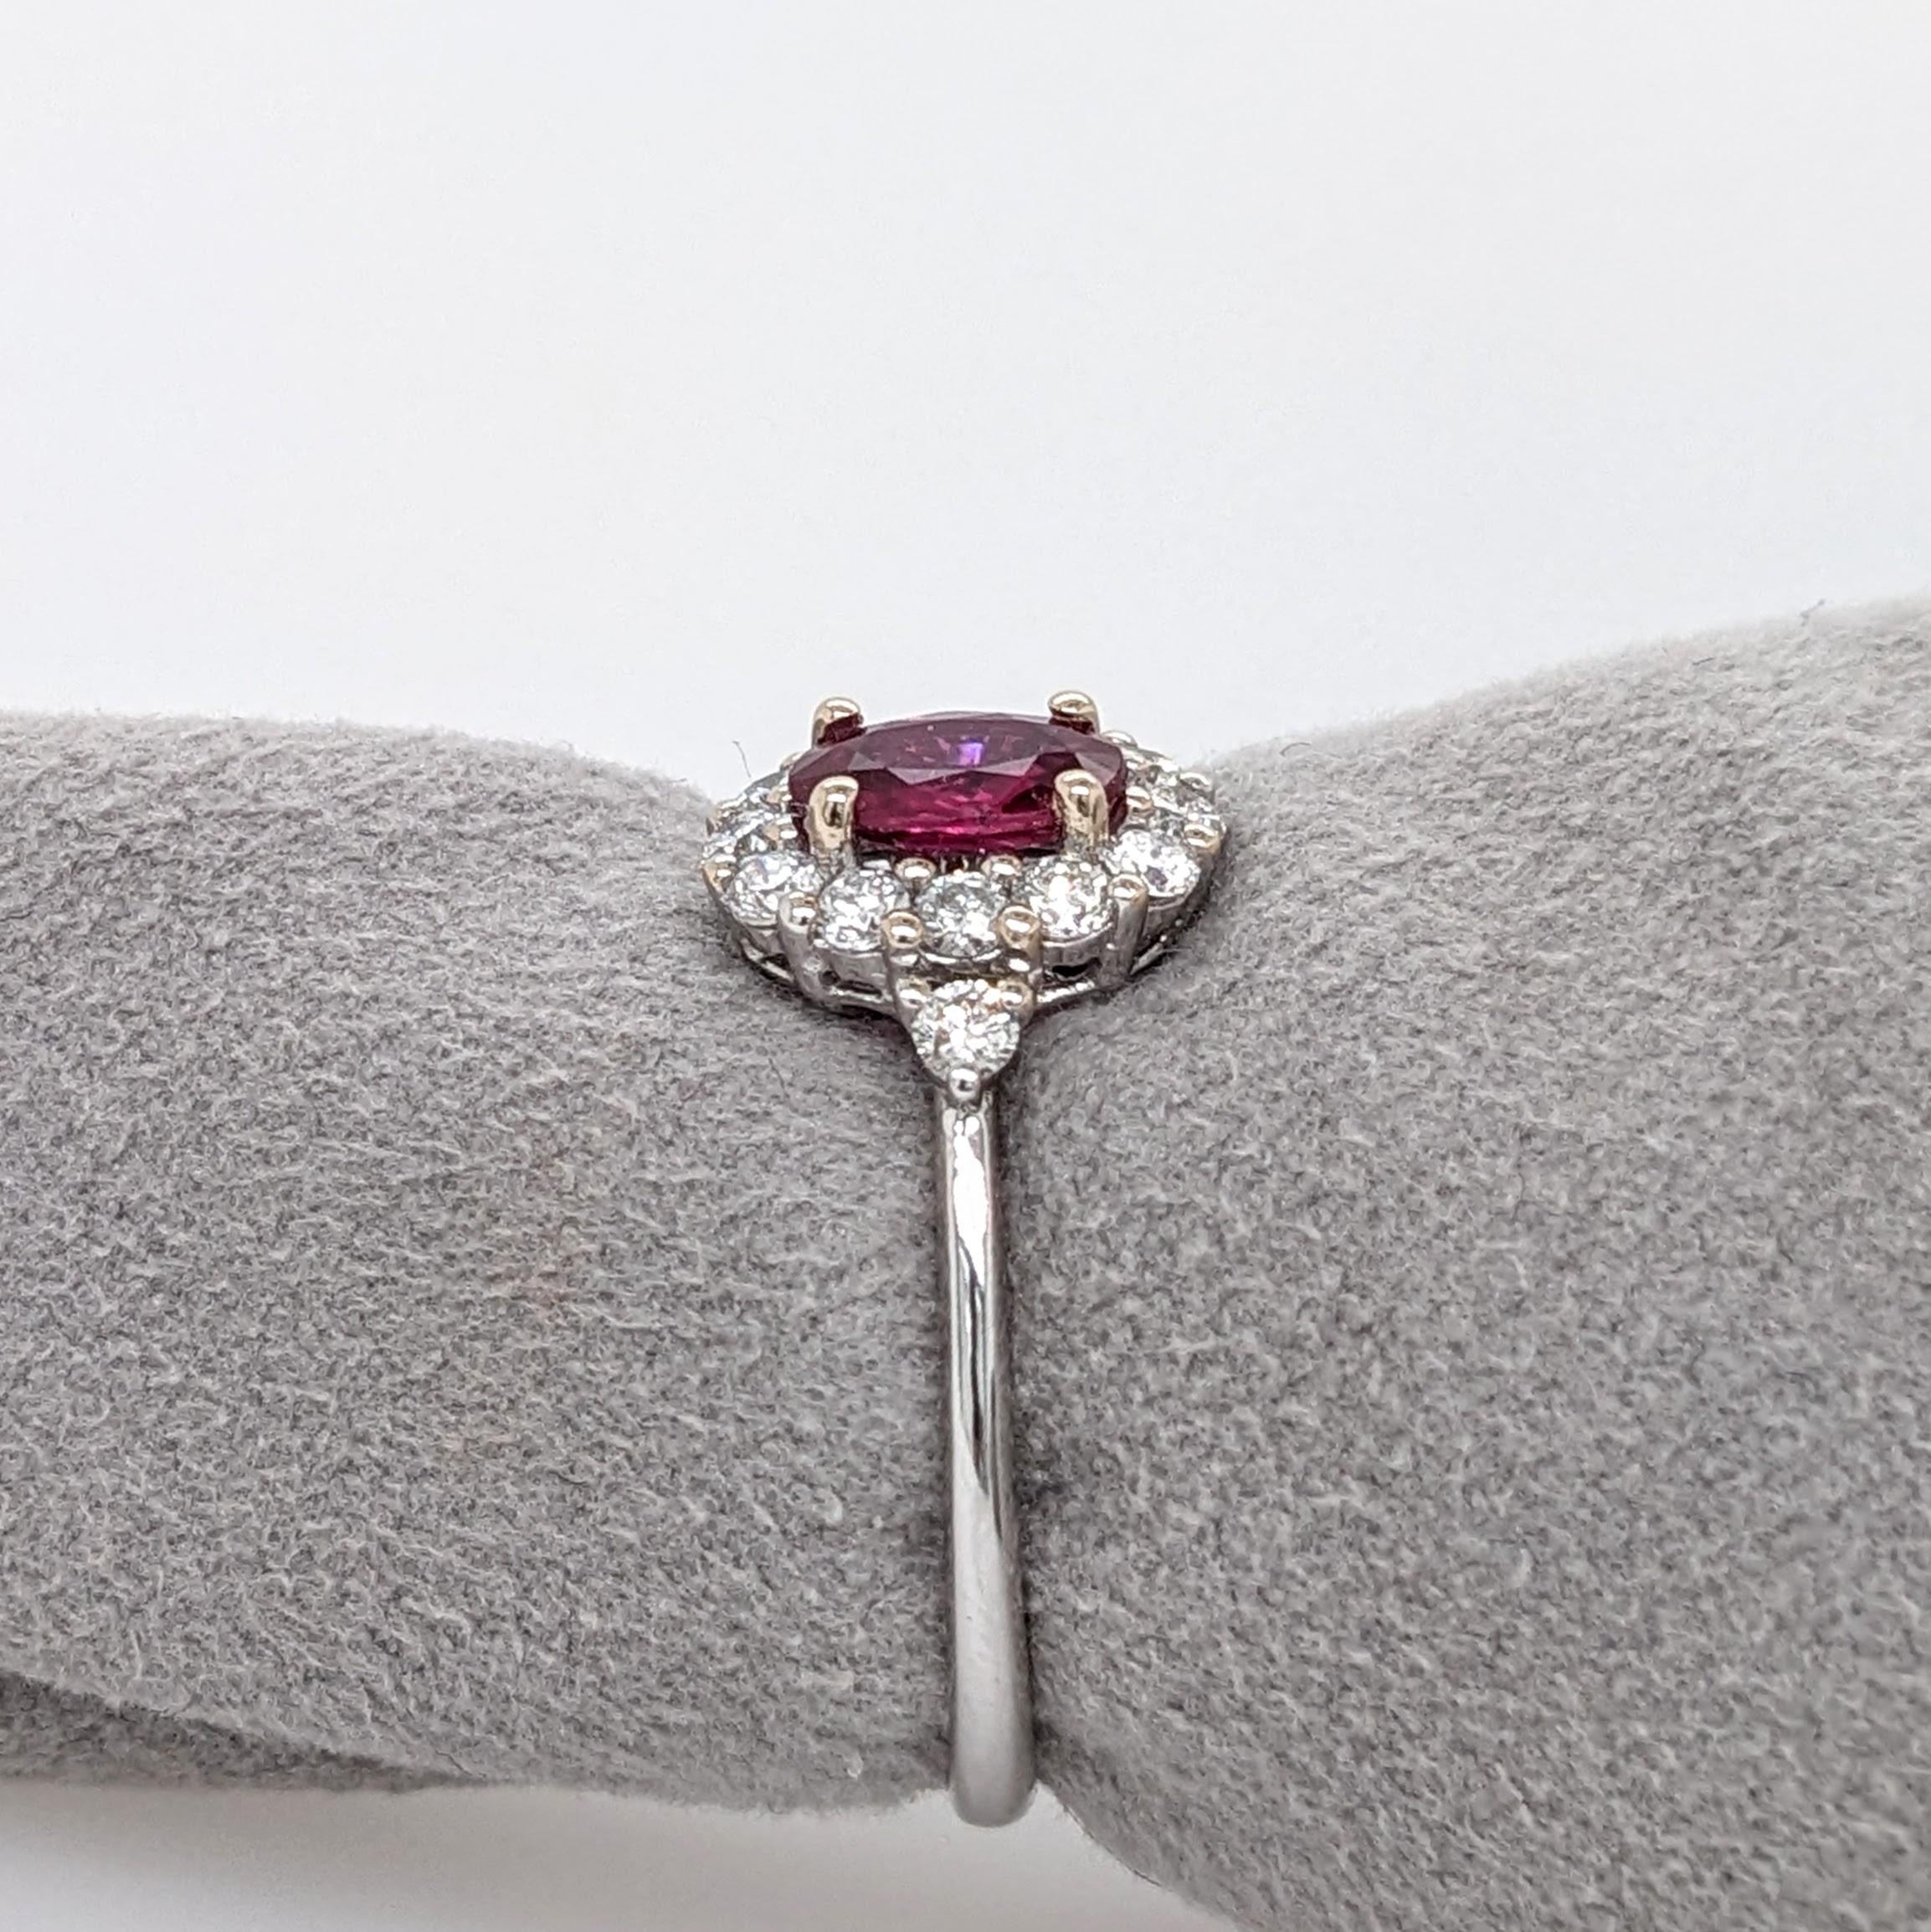 Mozambique Red Ruby Ring w Natural Diamonds in Solid 14K White Gold Oval 6x4mm